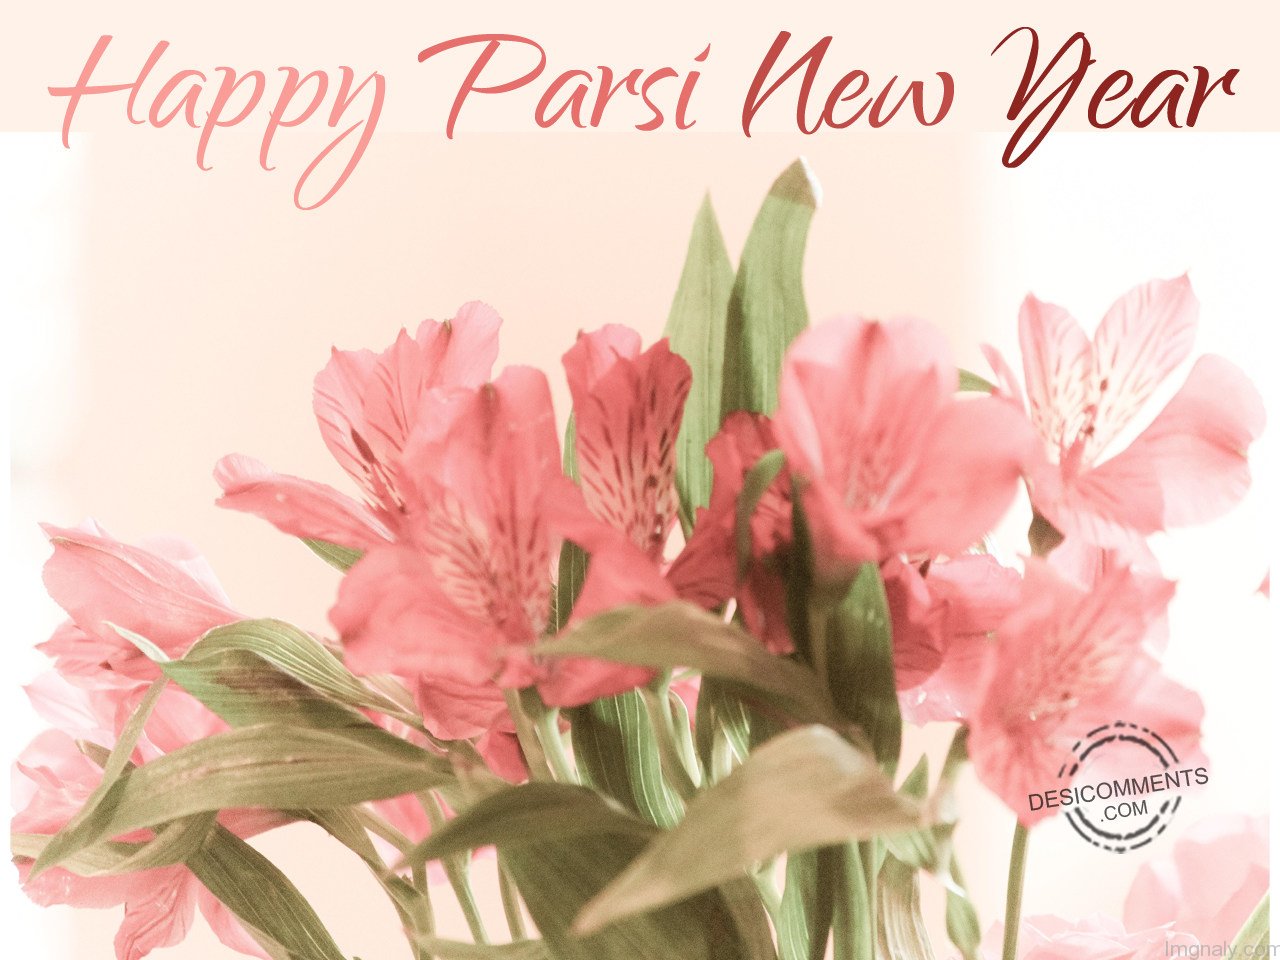 Happy Parsi New Year Flowers Picture